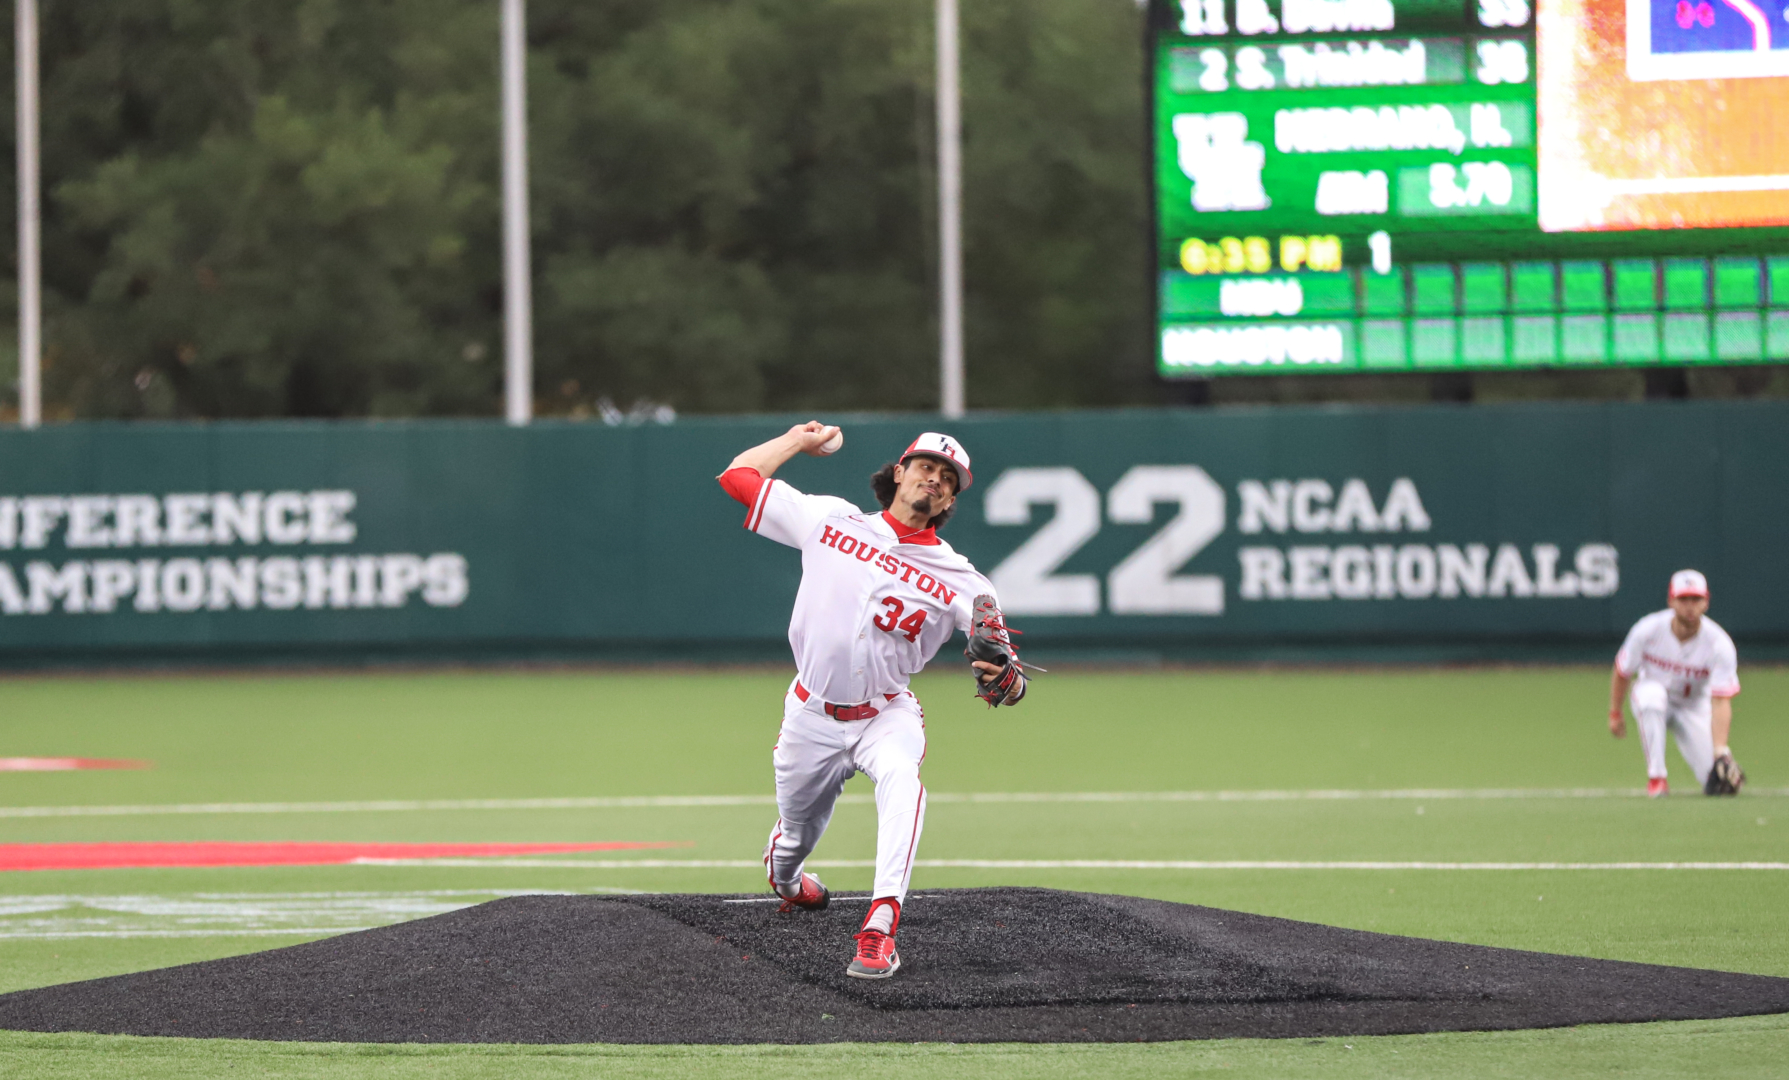 UH baseball's pitching combined to give up two runs on three hits in the Cougars' win over HBU on Tuesday night. | Sean Thomas/The Cougar